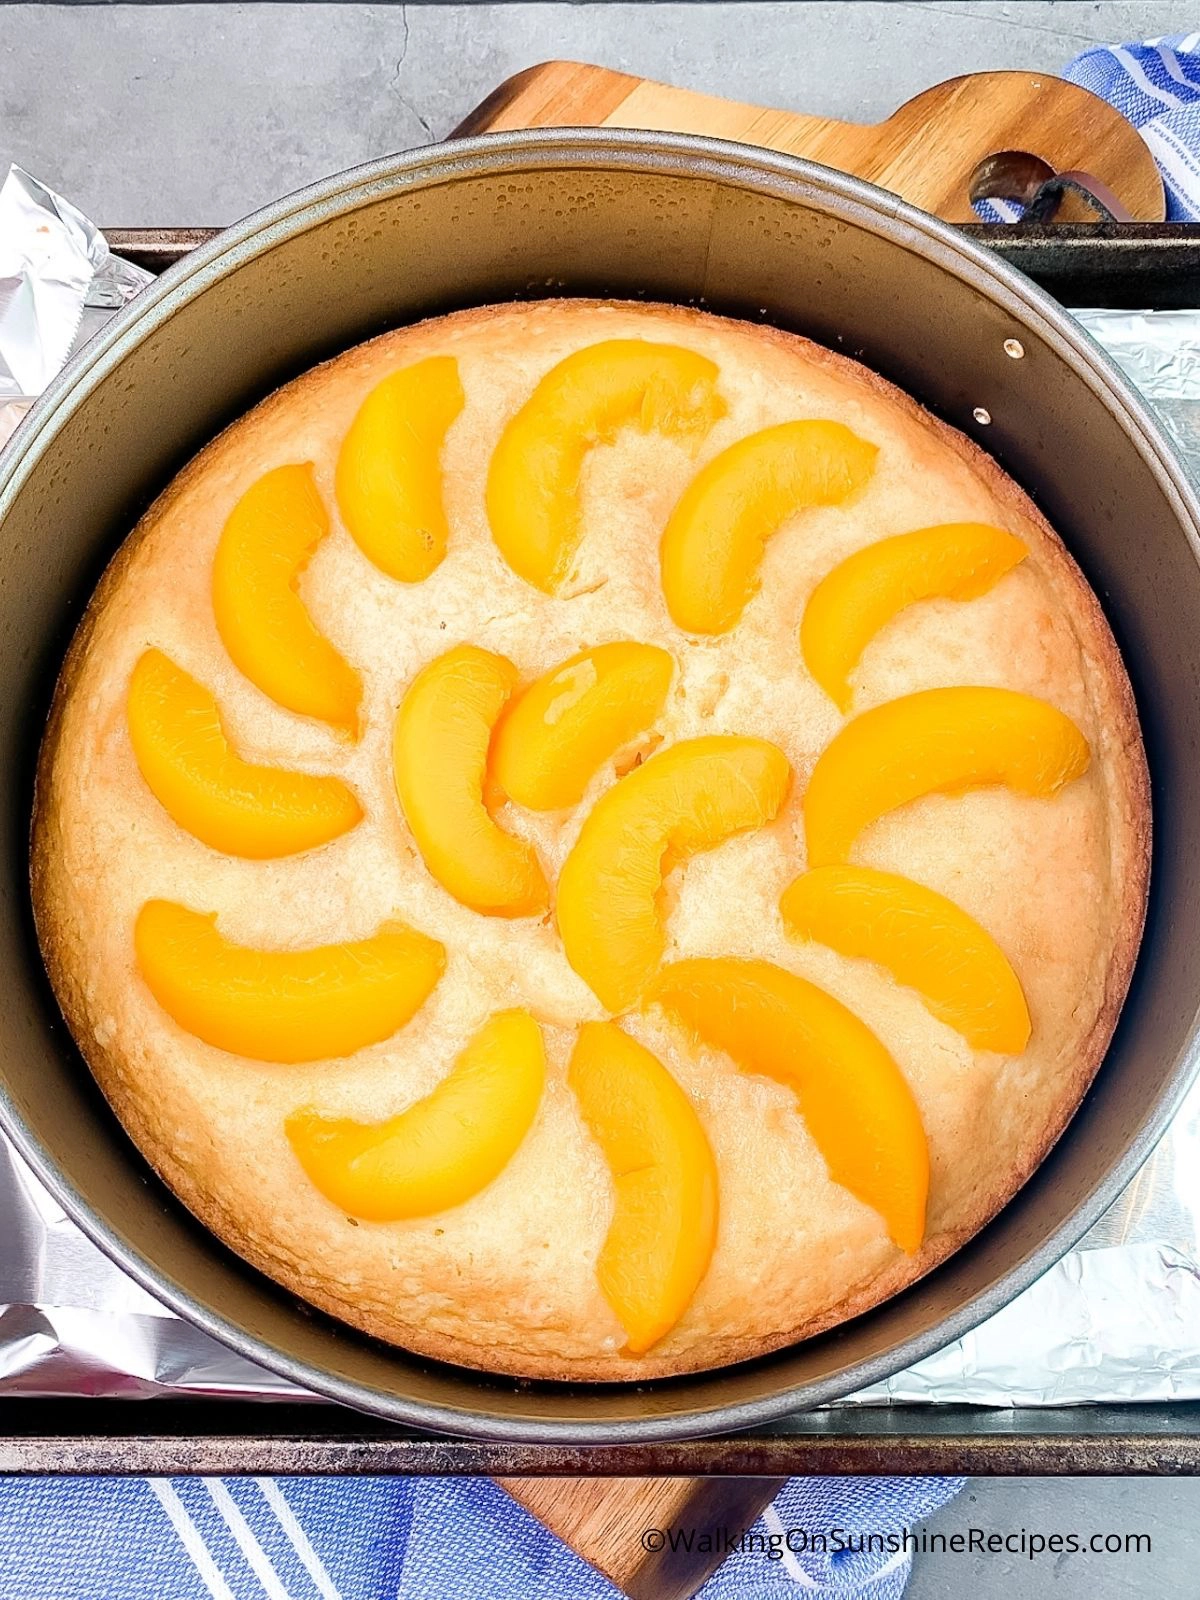 Add canned peaches to partially baked peach cake